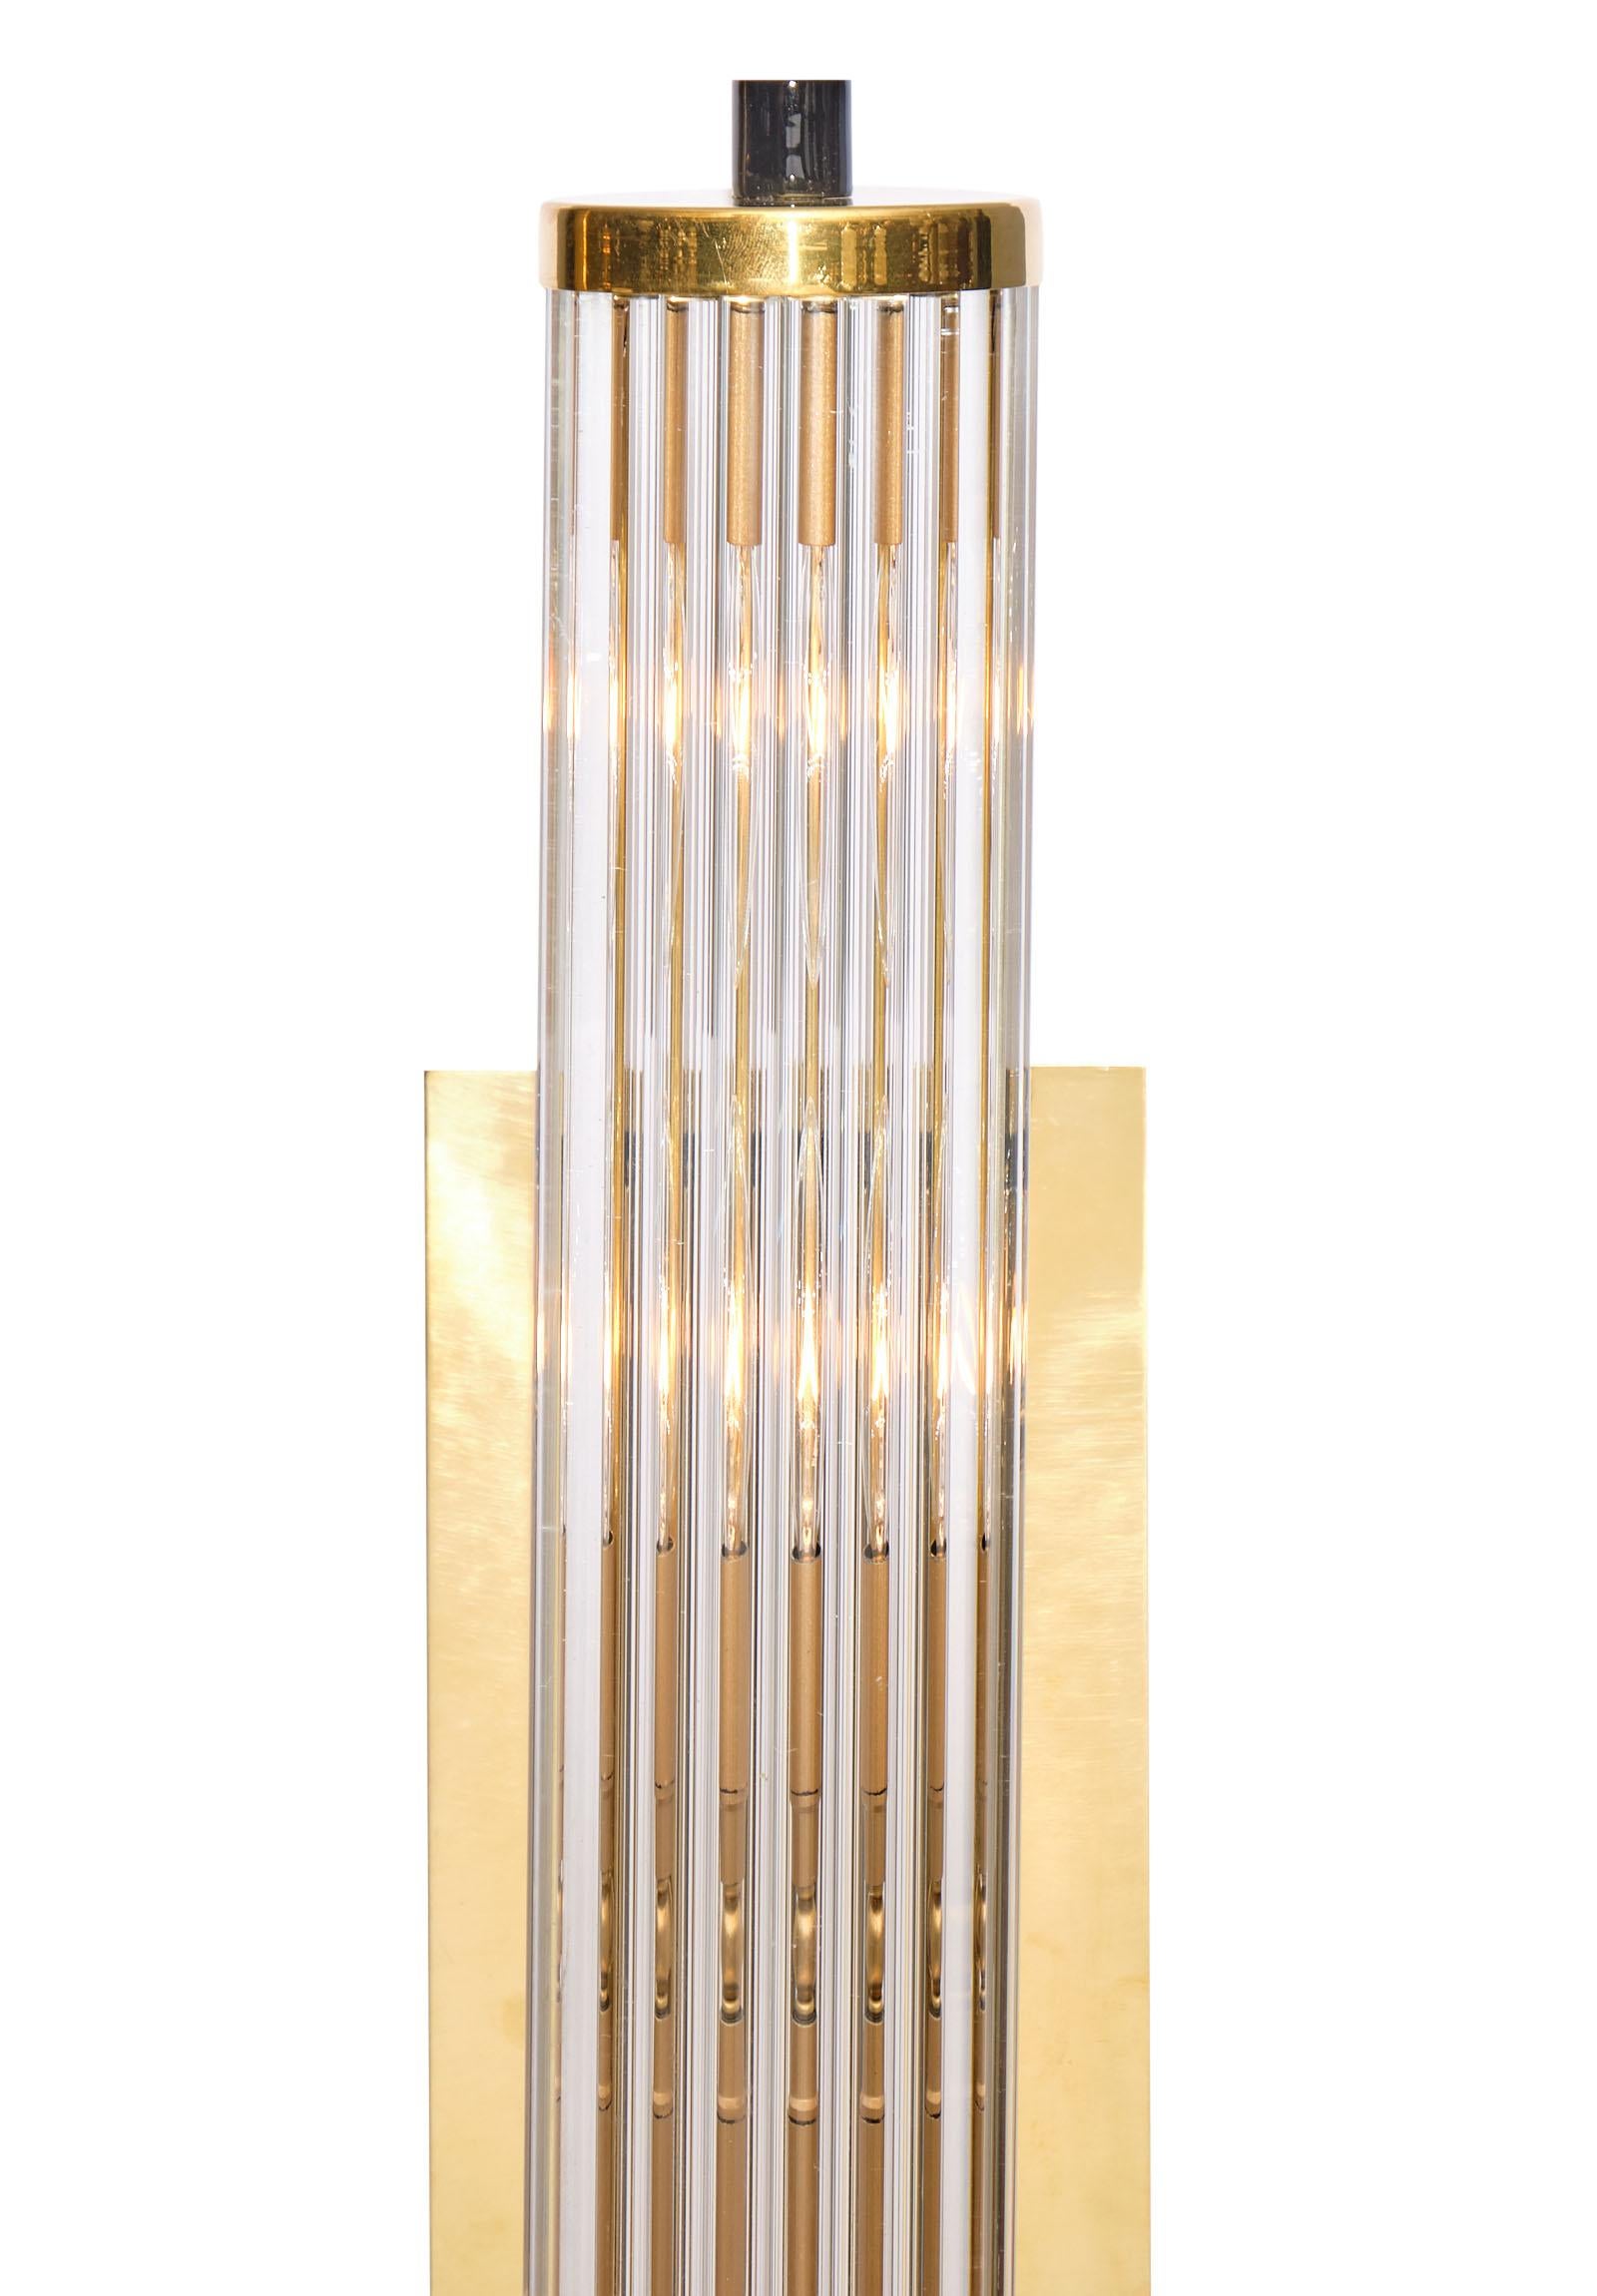 Brass and Murano glass rod sconces featuring multiple crystal clear glass rods hand blown by craftsman in Italy. They are held by a brass structure with black metal finials. We love the modernist style. They have been newly wired to fit US